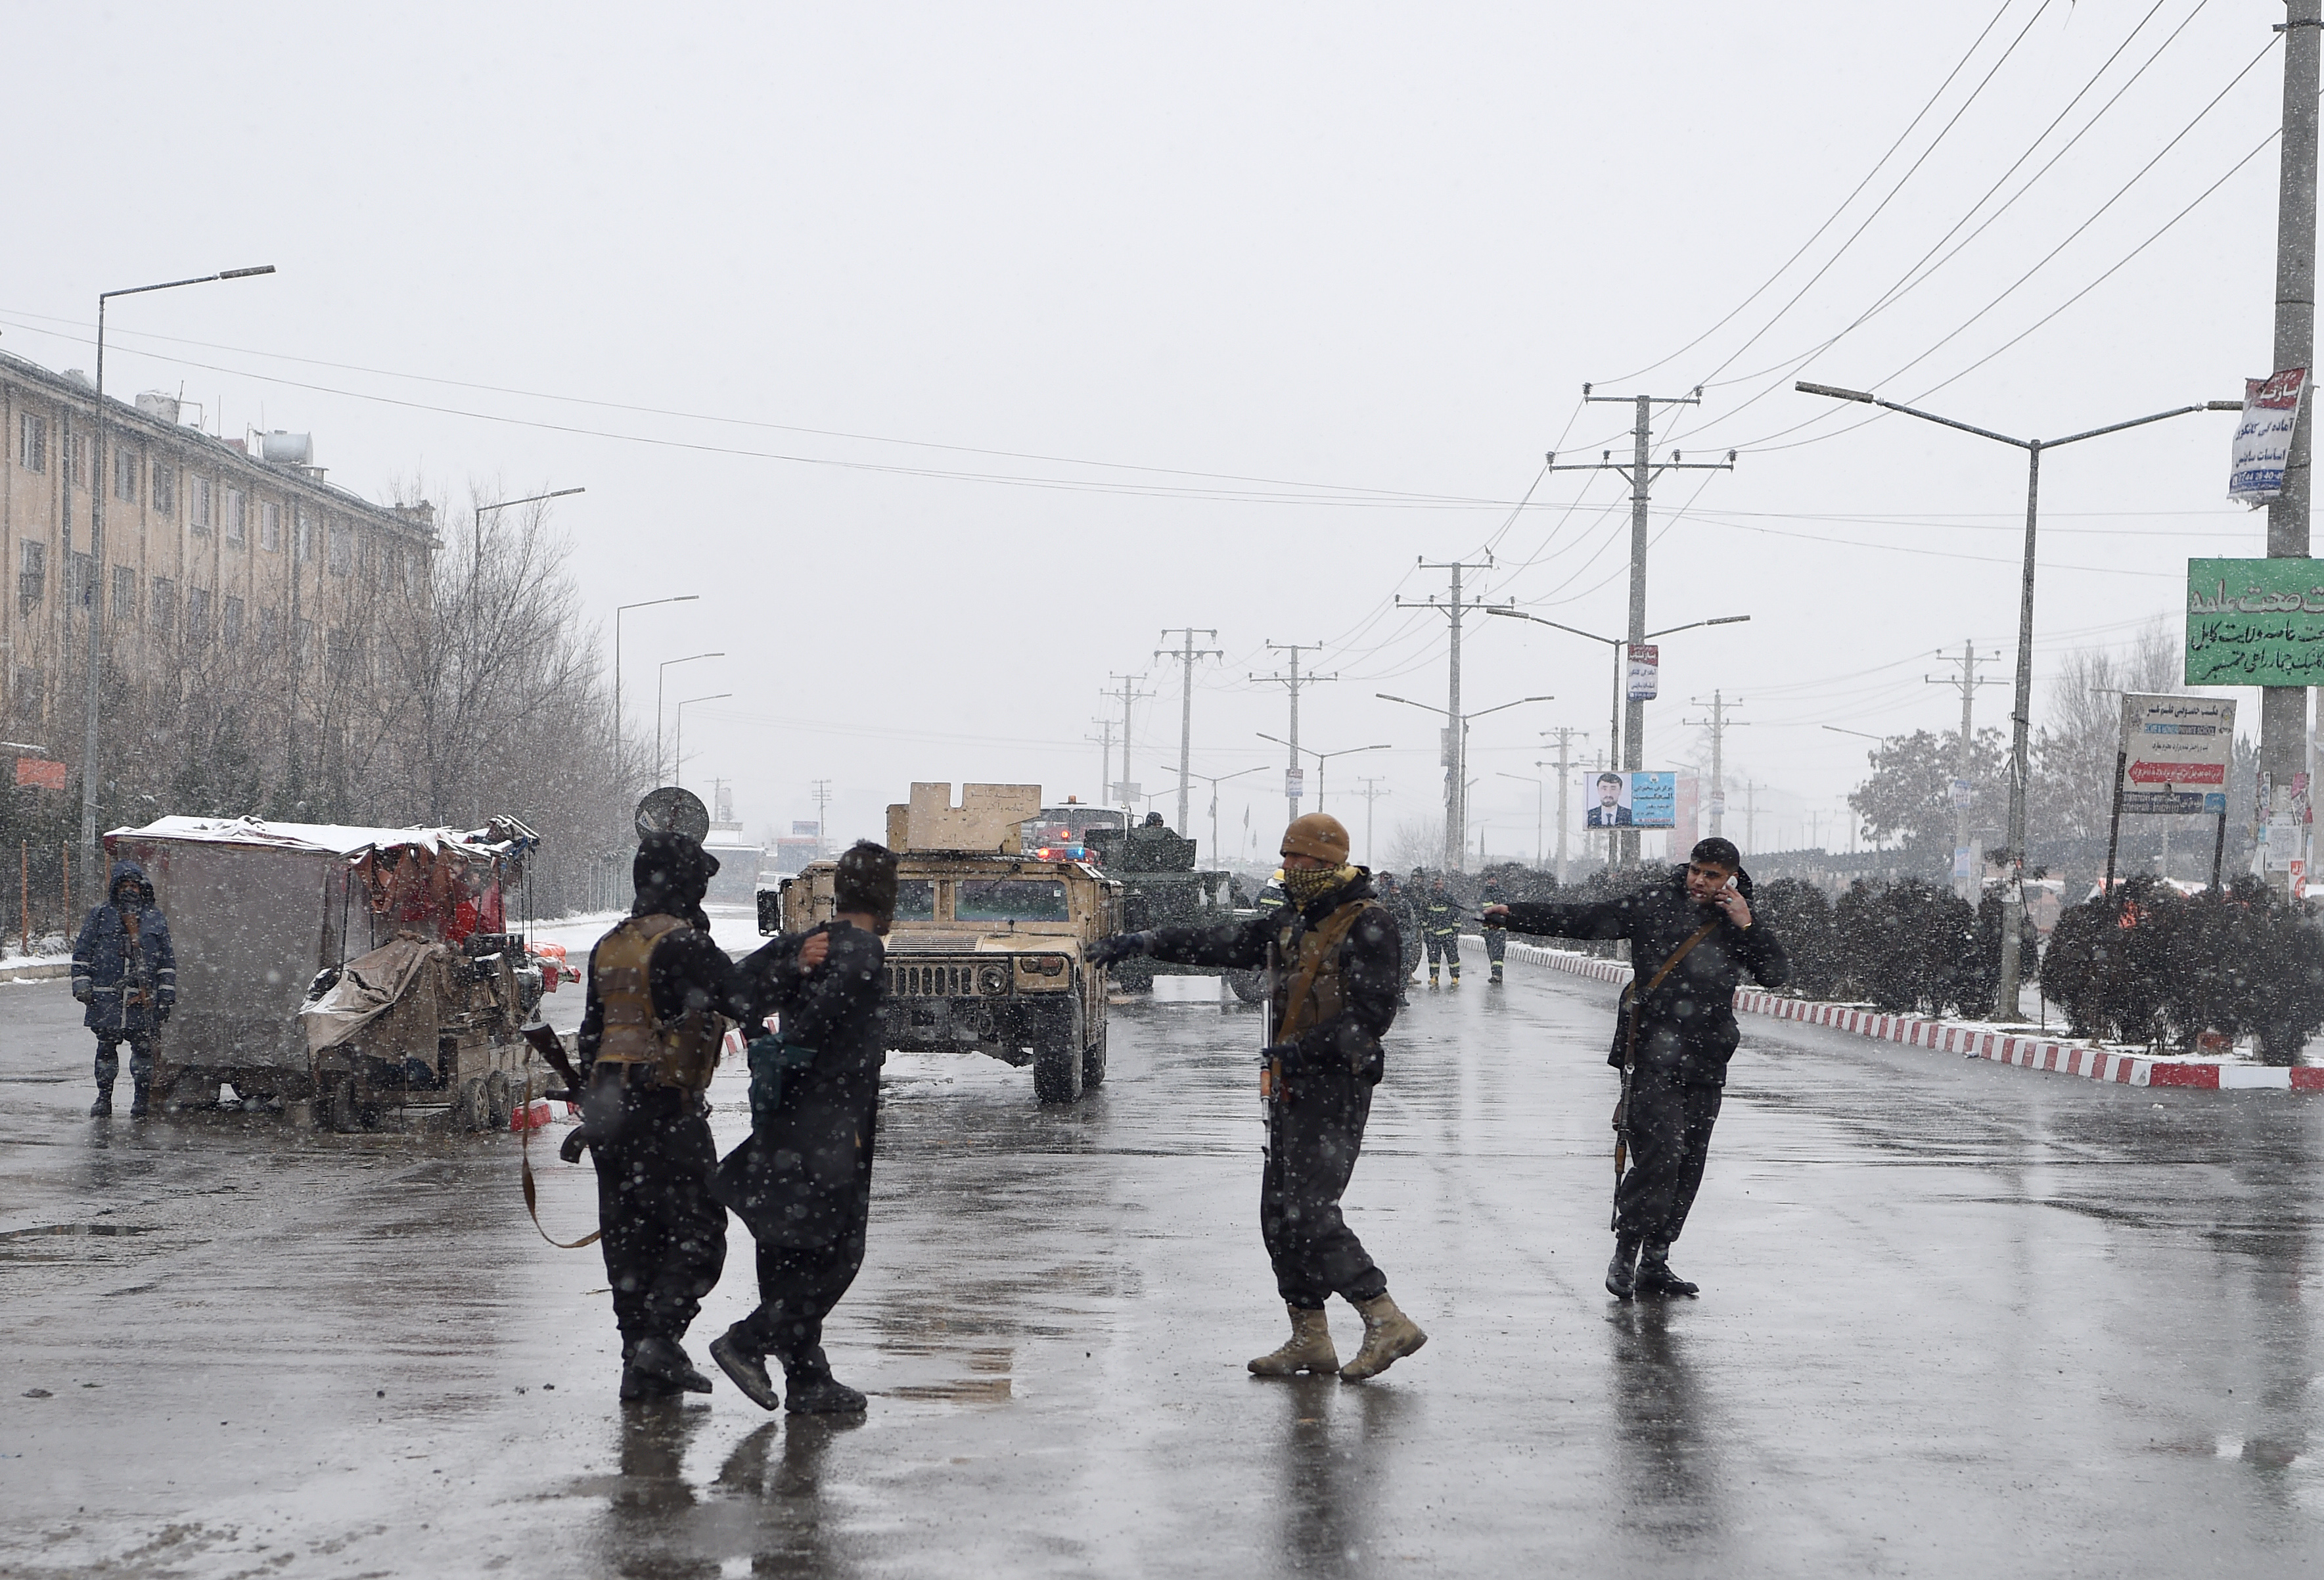 Afghan security personnel detain a suspect as they guard the site of an attack near the Marshal Fahim Military Academy base in Kabul on January 29, 2018. (Wakil Kohsar—AFP/Getty Images)